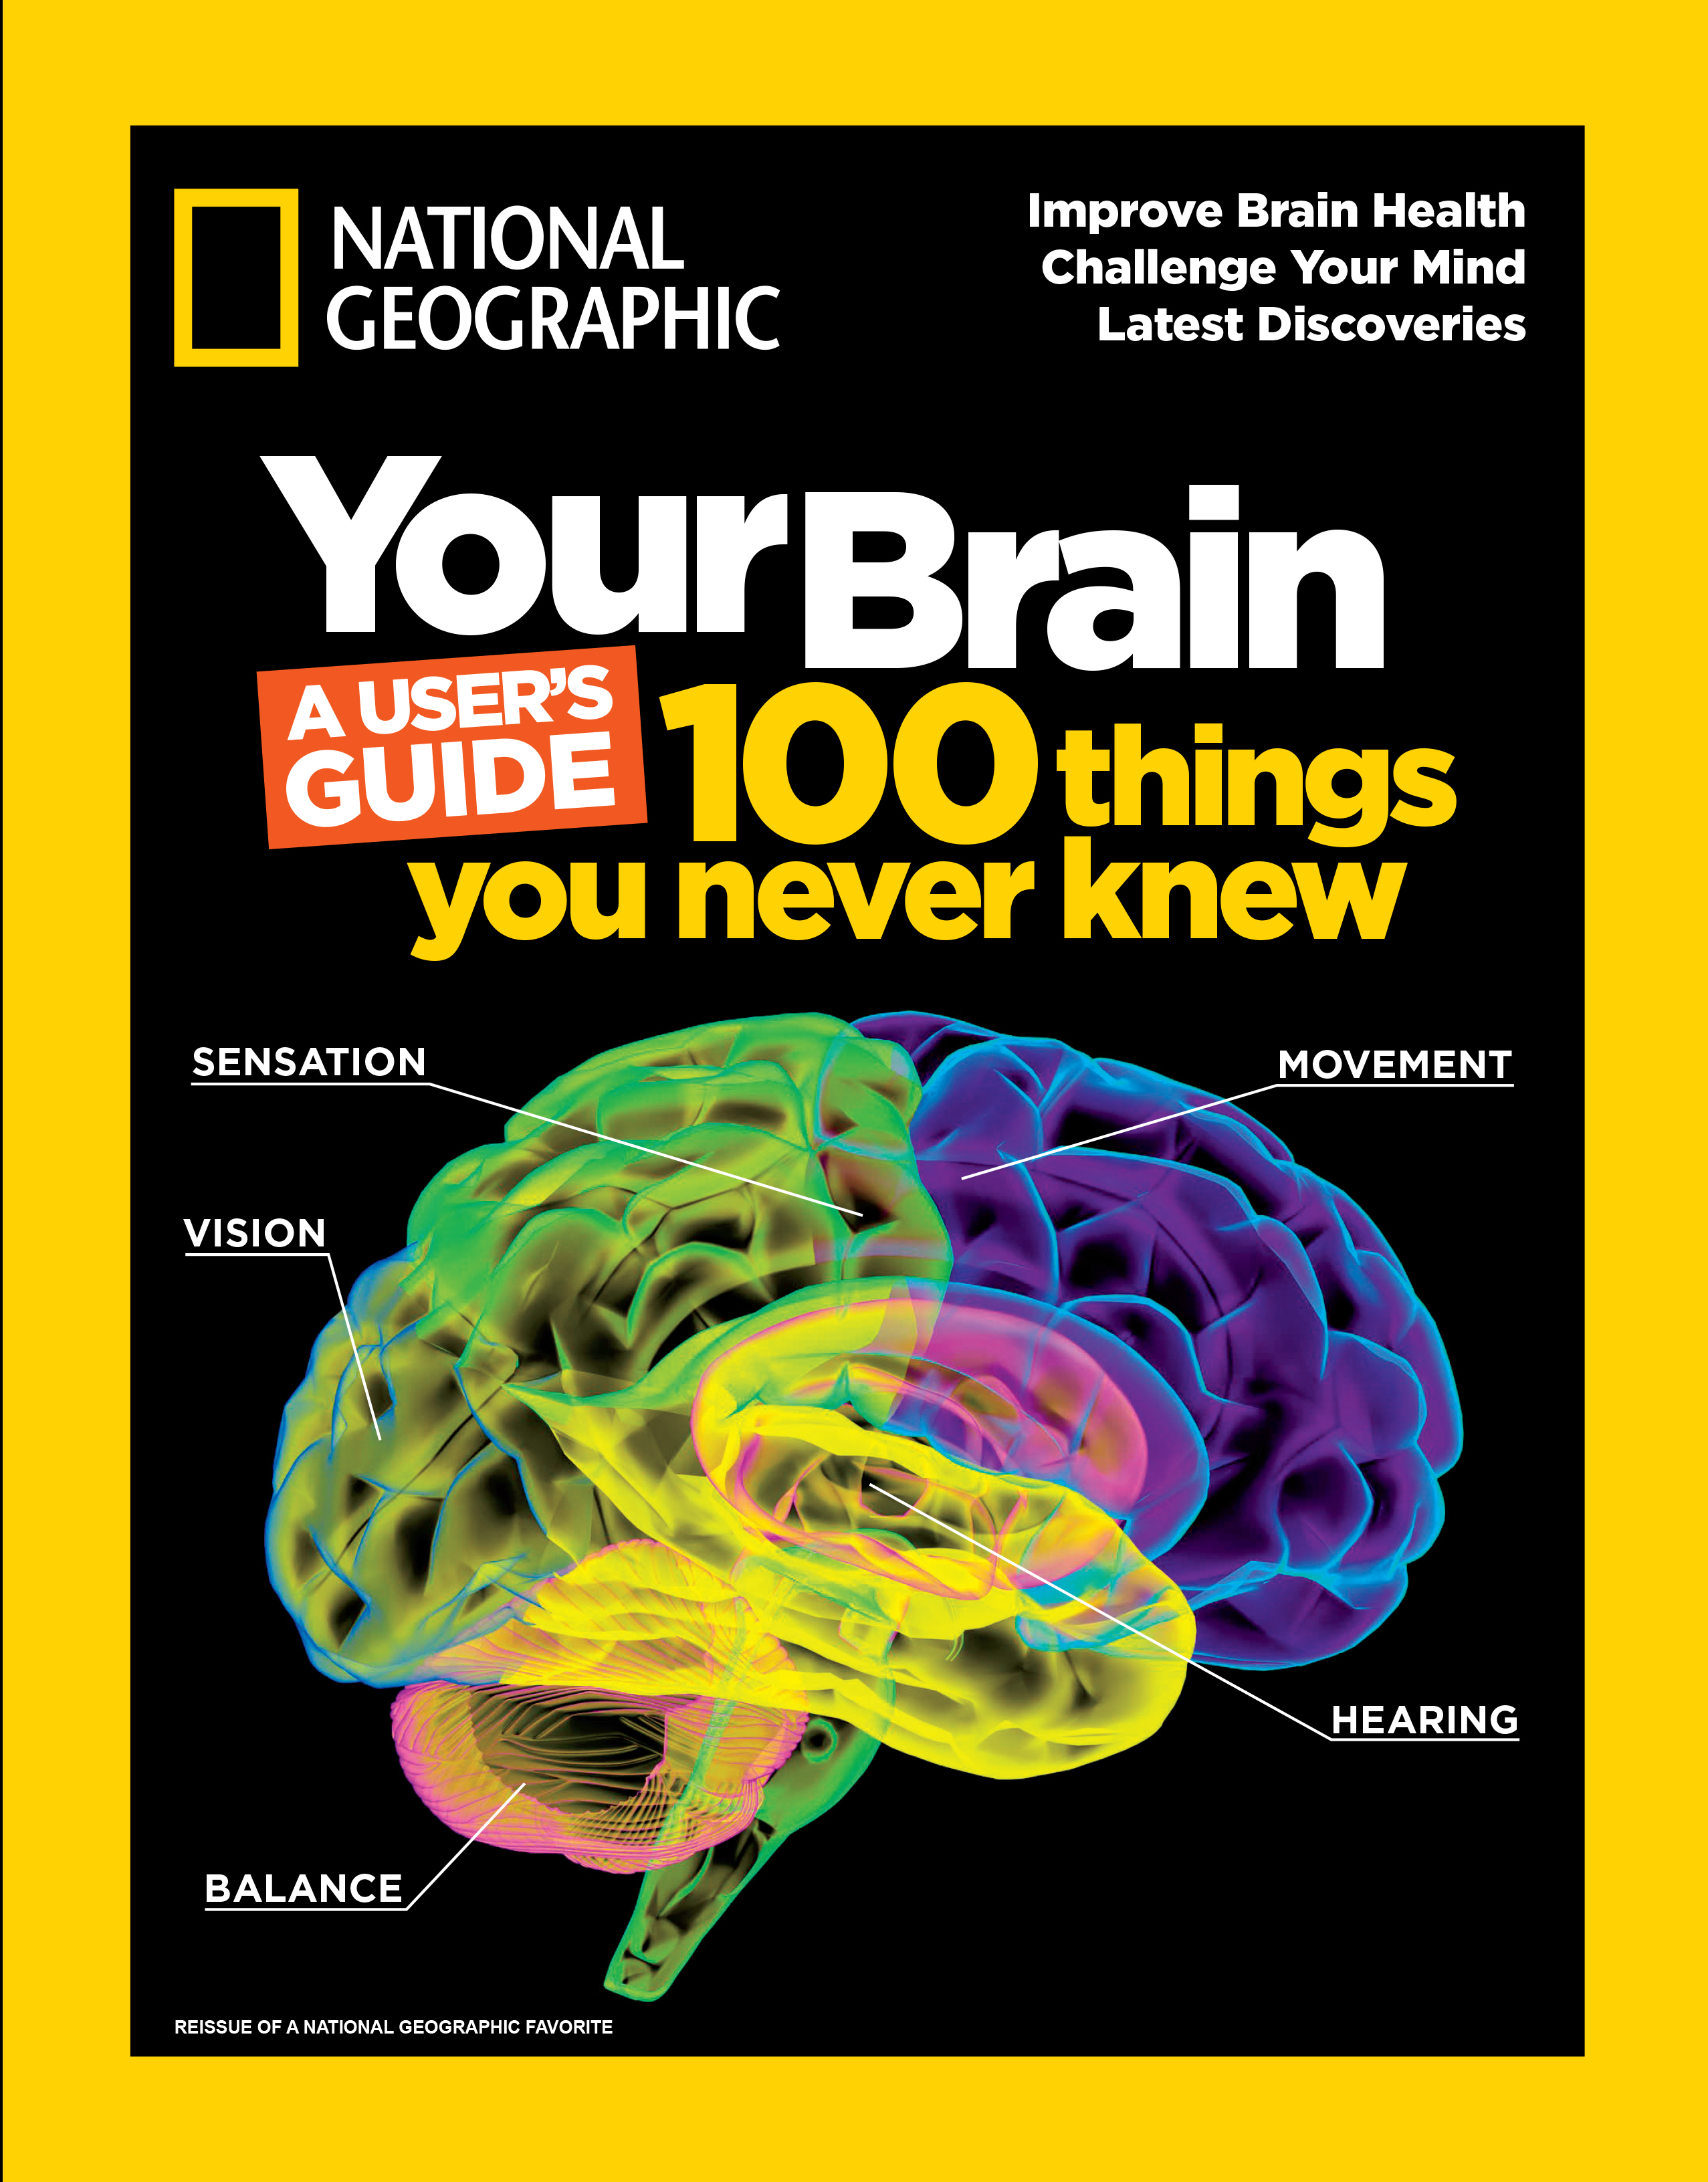 Your brain: A User's Guide cover image